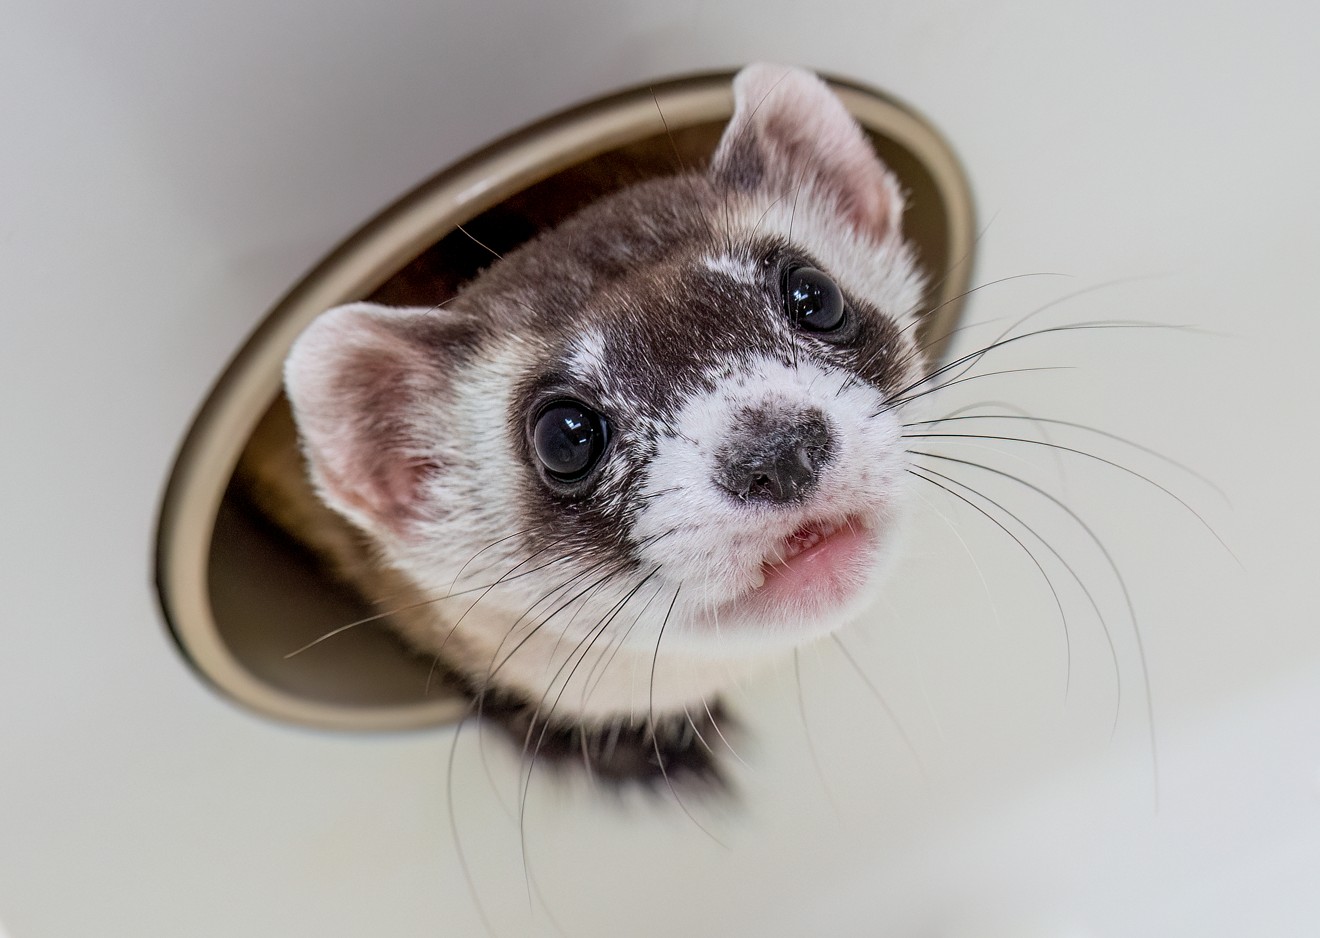 Black-footed ferrets are some of the most endangered animals in the country. Phoenix Zoo and Huss Brewing Co. have teamed up to help.